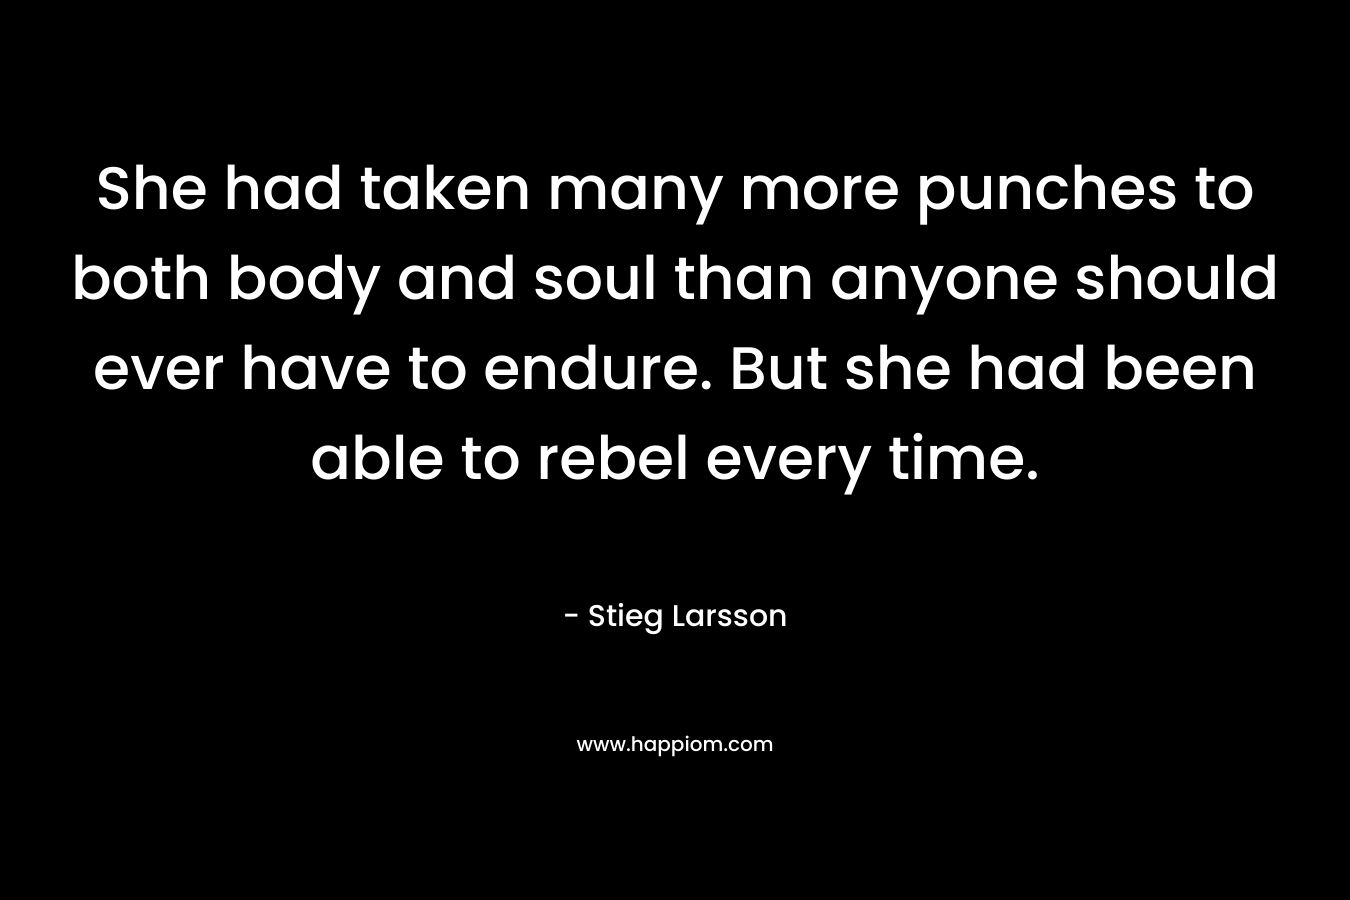 She had taken many more punches to both body and soul than anyone should ever have to endure. But she had been able to rebel every time. – Stieg Larsson